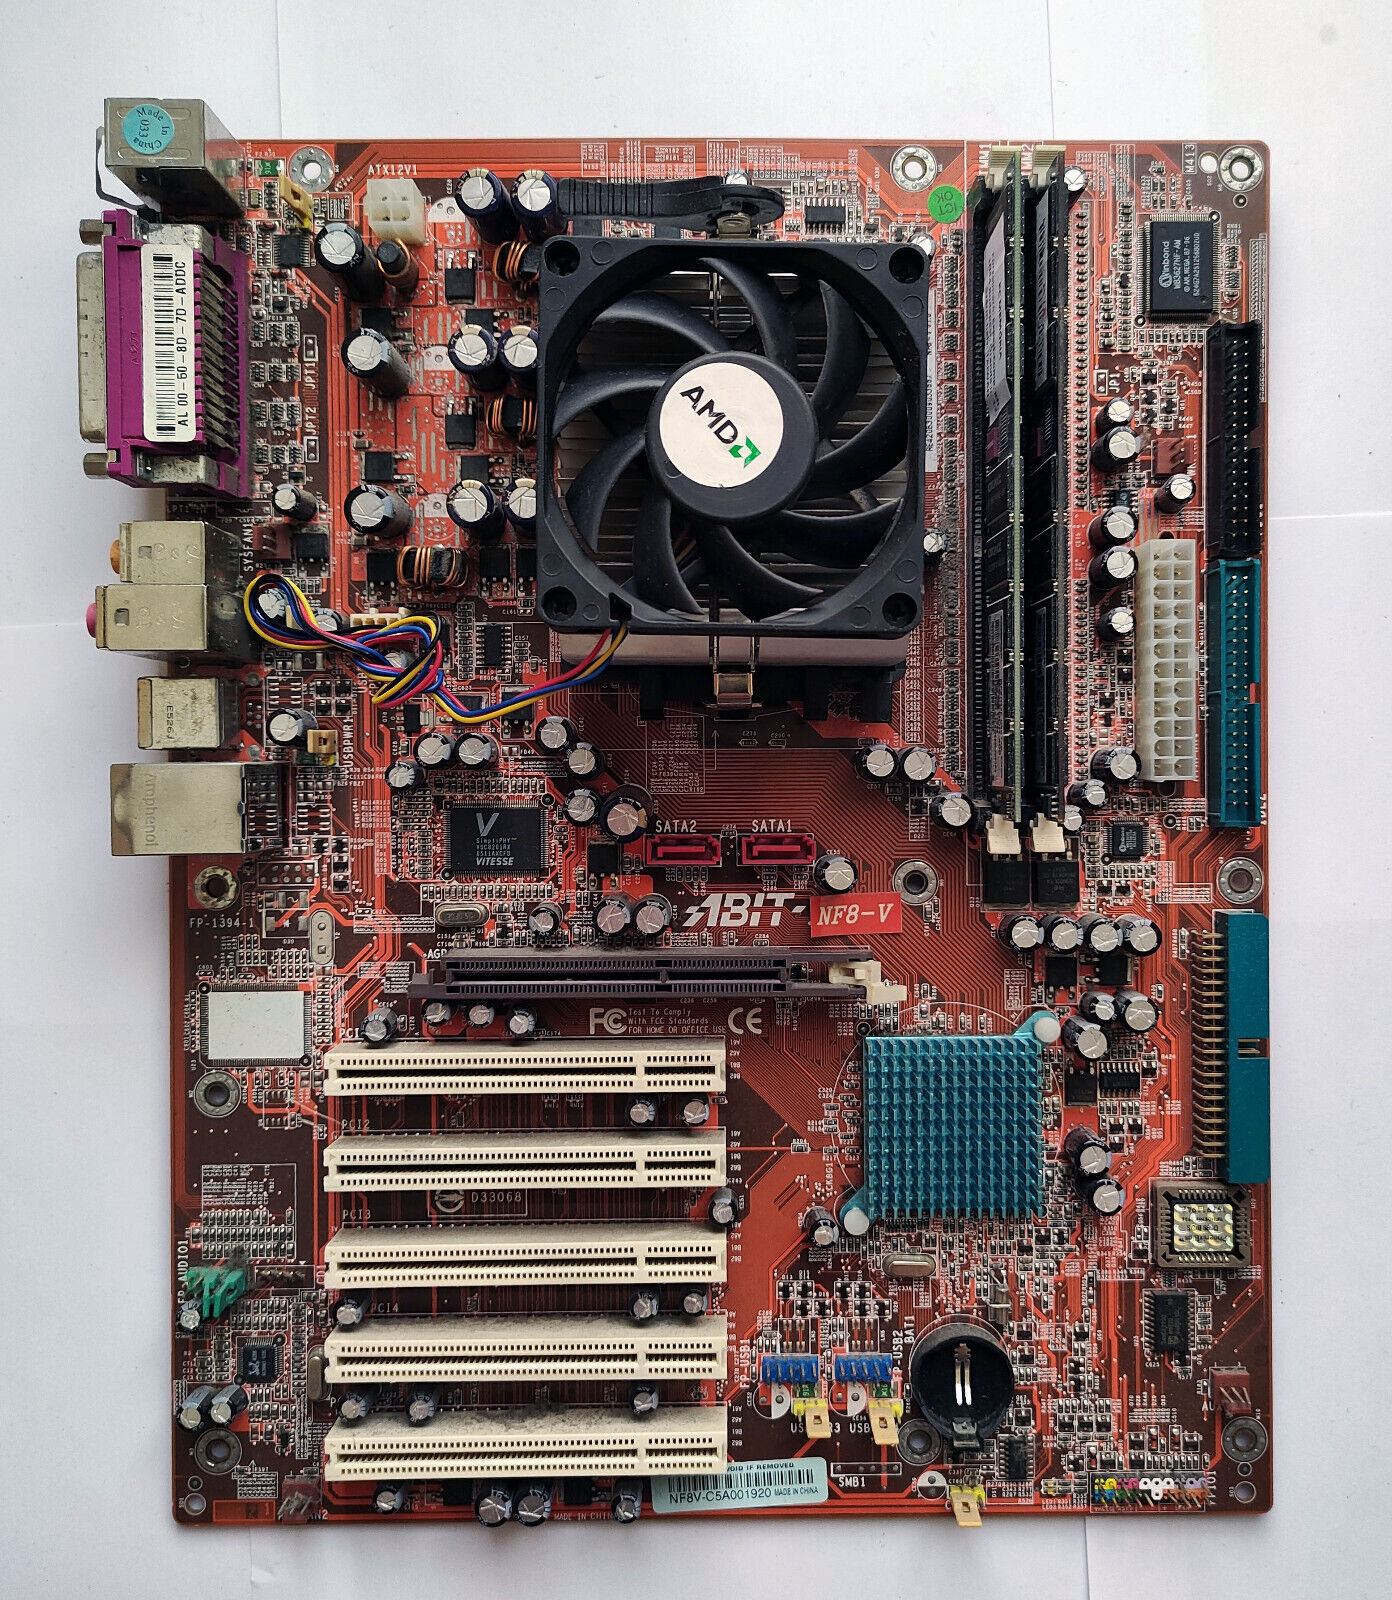 Abit NF8-V Motherboard with Athlon 64 3000+ CPU and 2GB RAM - Test OK